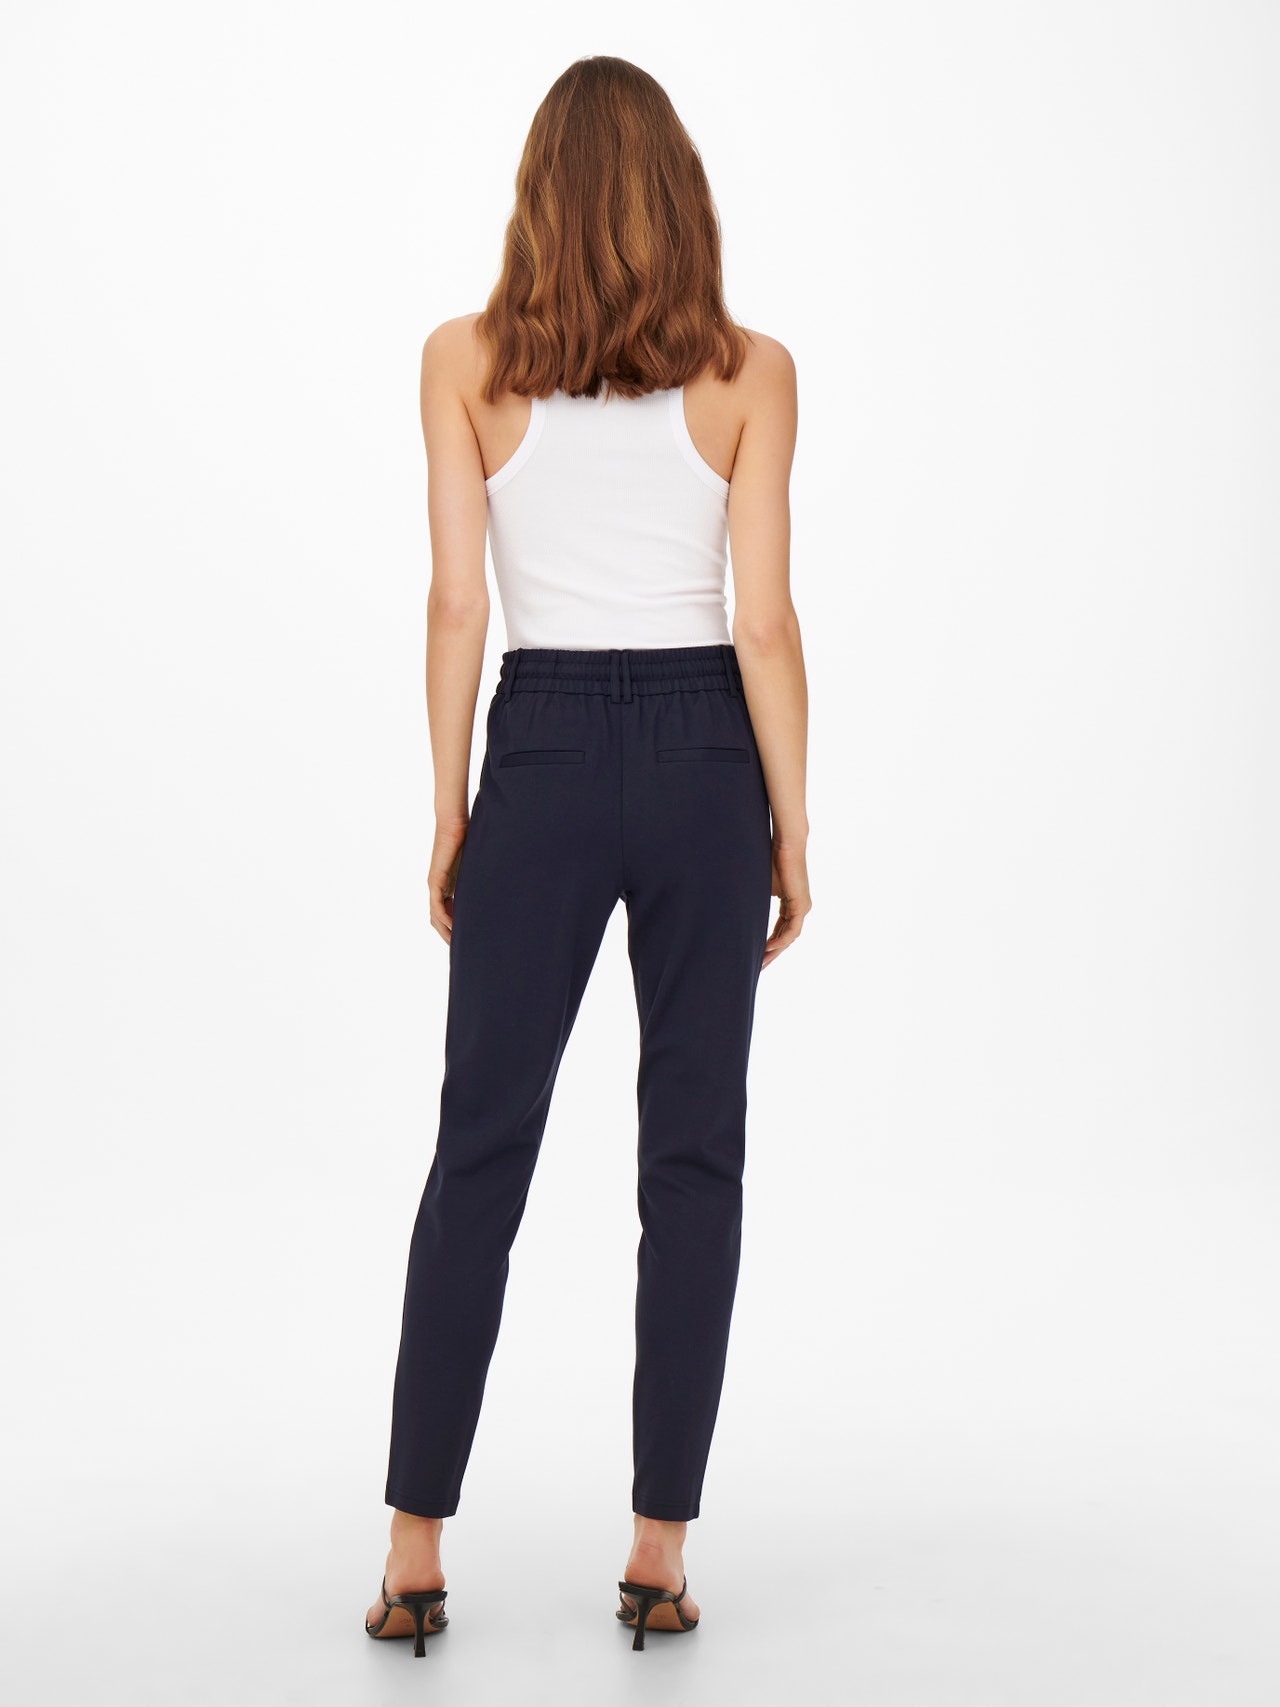 ONLY Regular Fit Trousers -Night Sky - 15115847